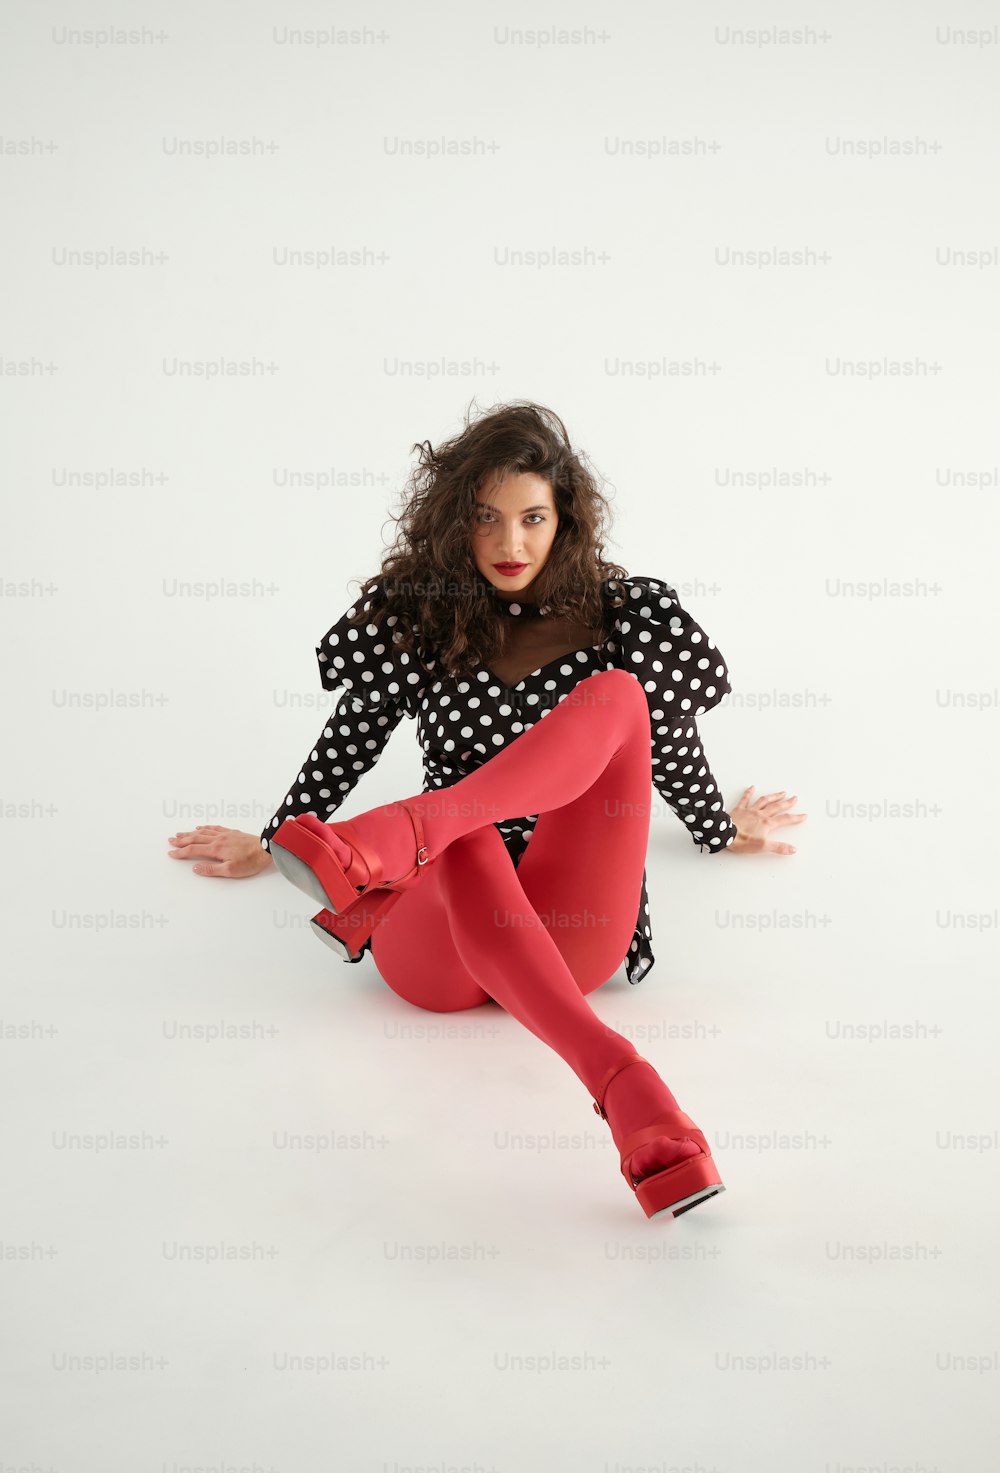 a woman sitting on the ground wearing red tights